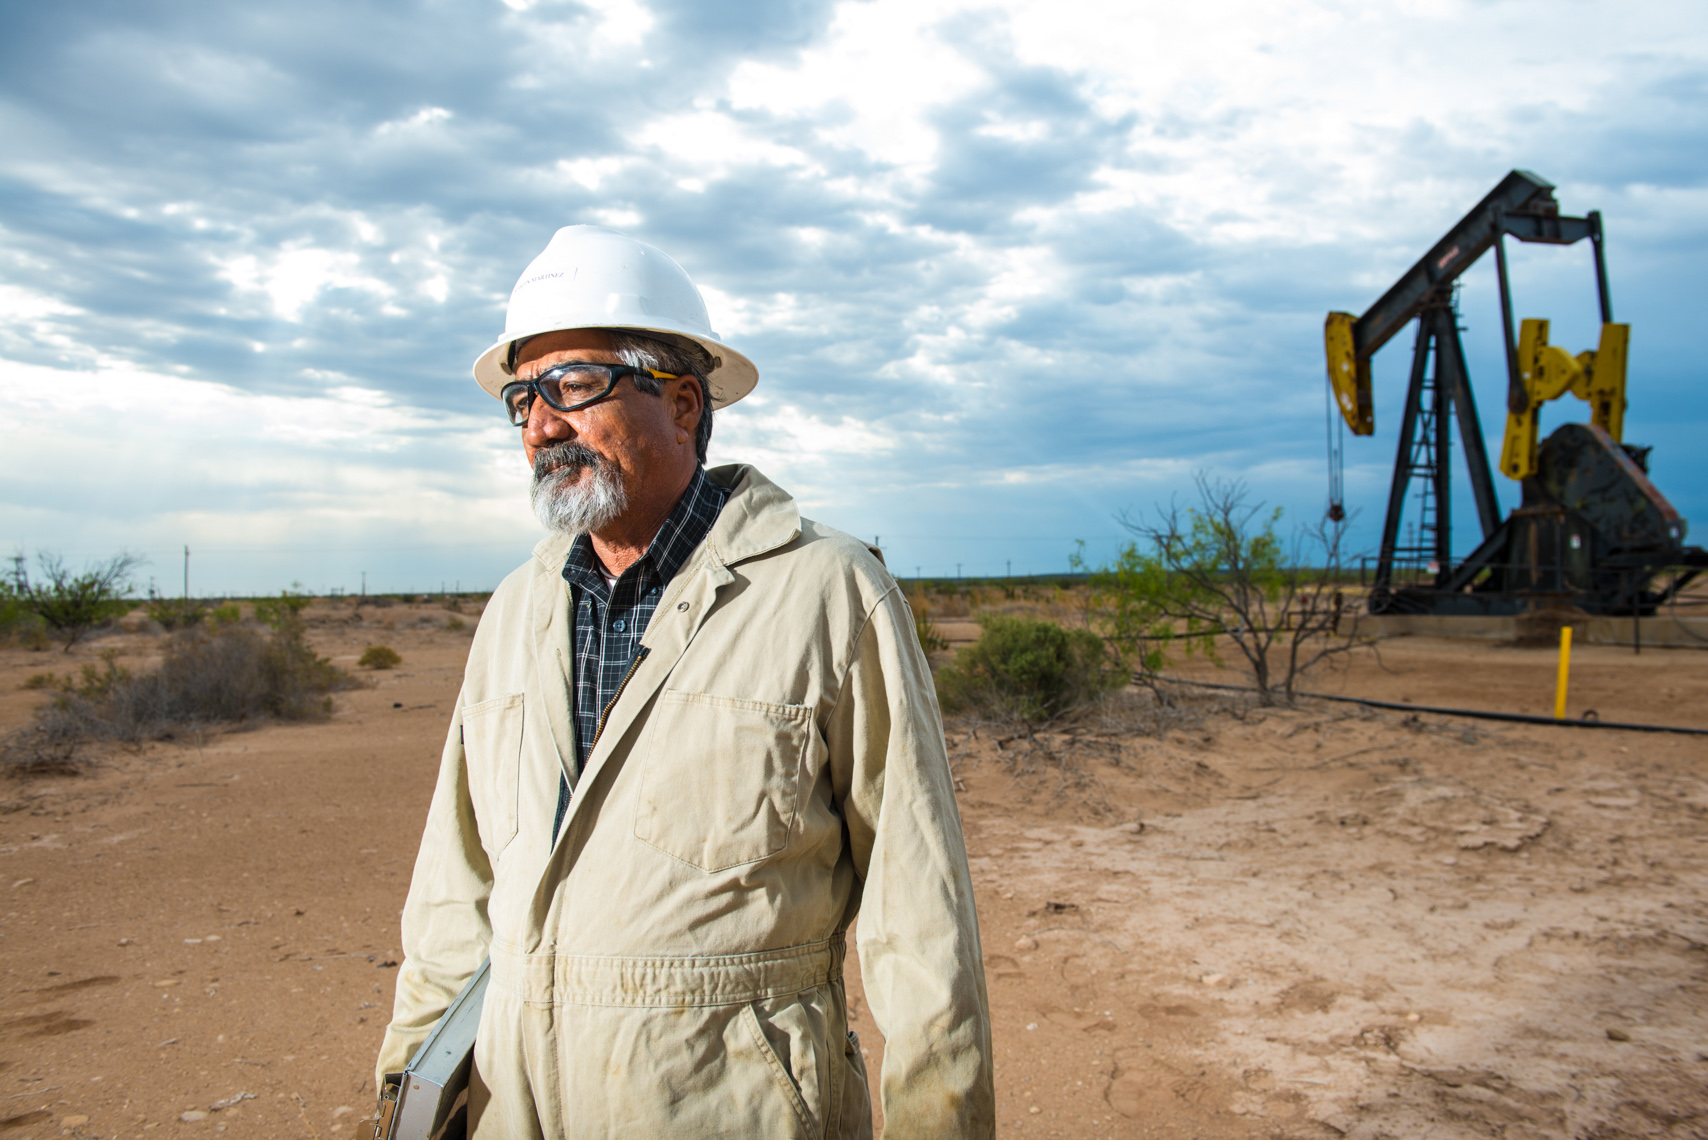 oil rig worker by an oil rig in rural west Texas